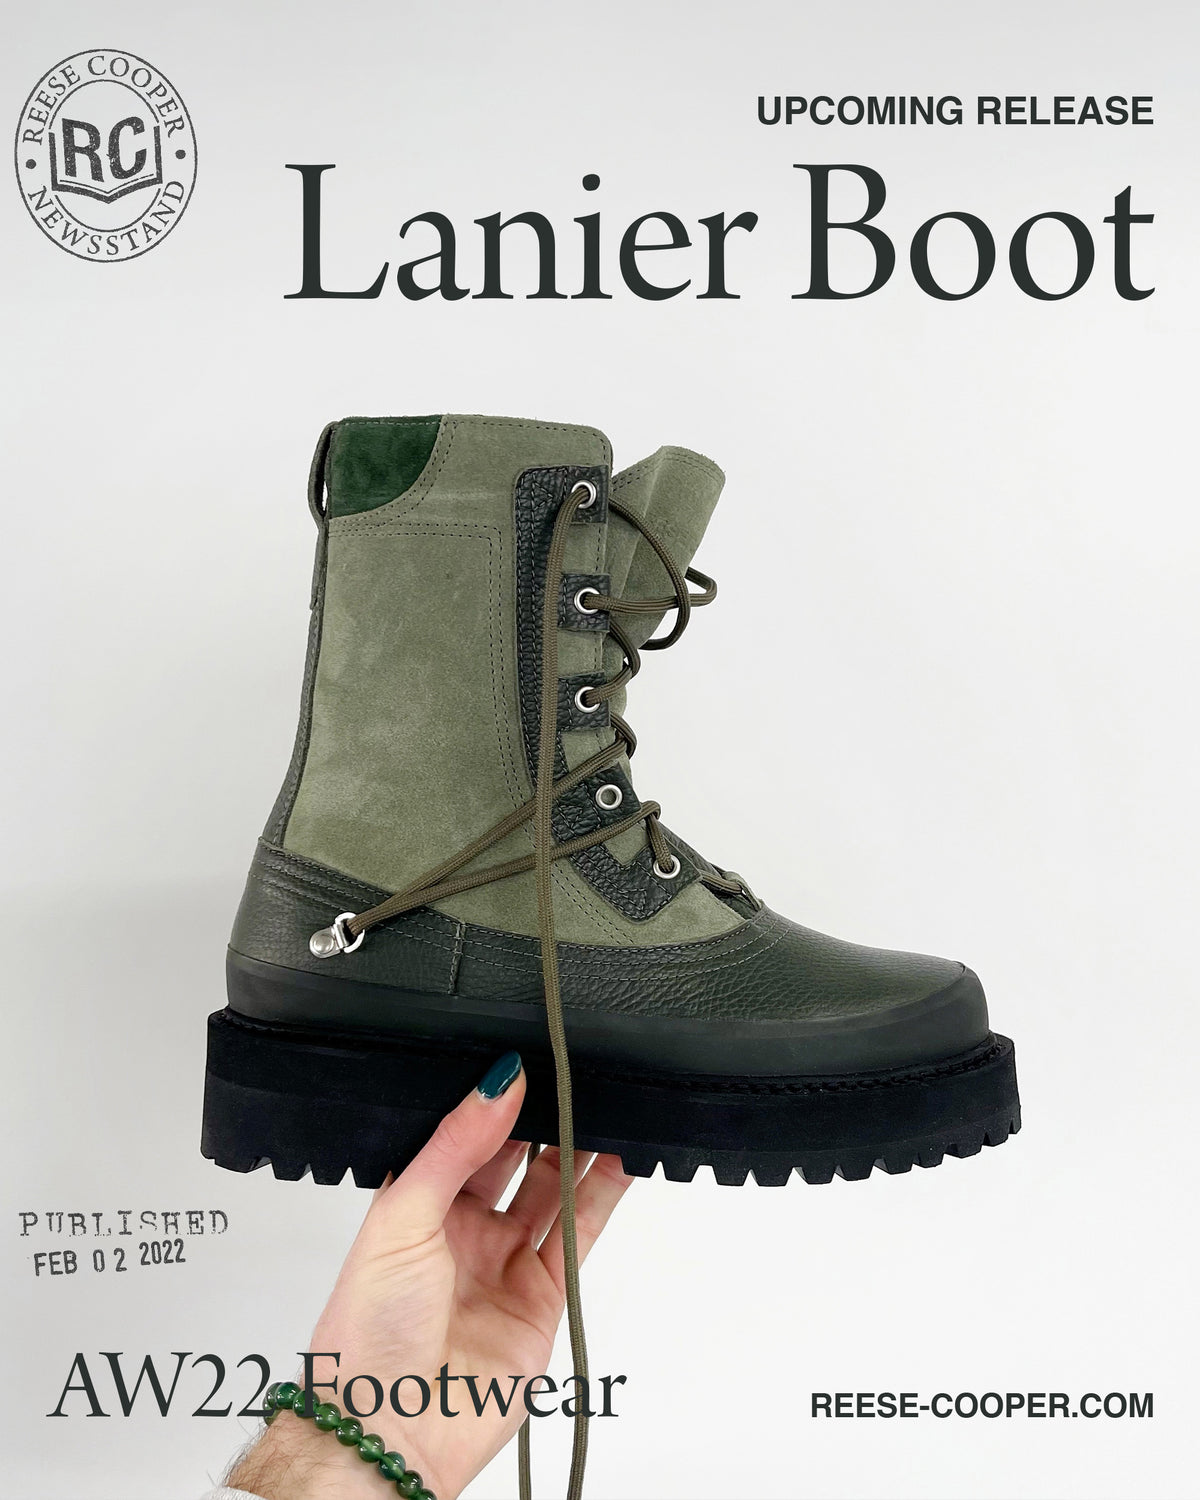 Introducing the Lanier Boot